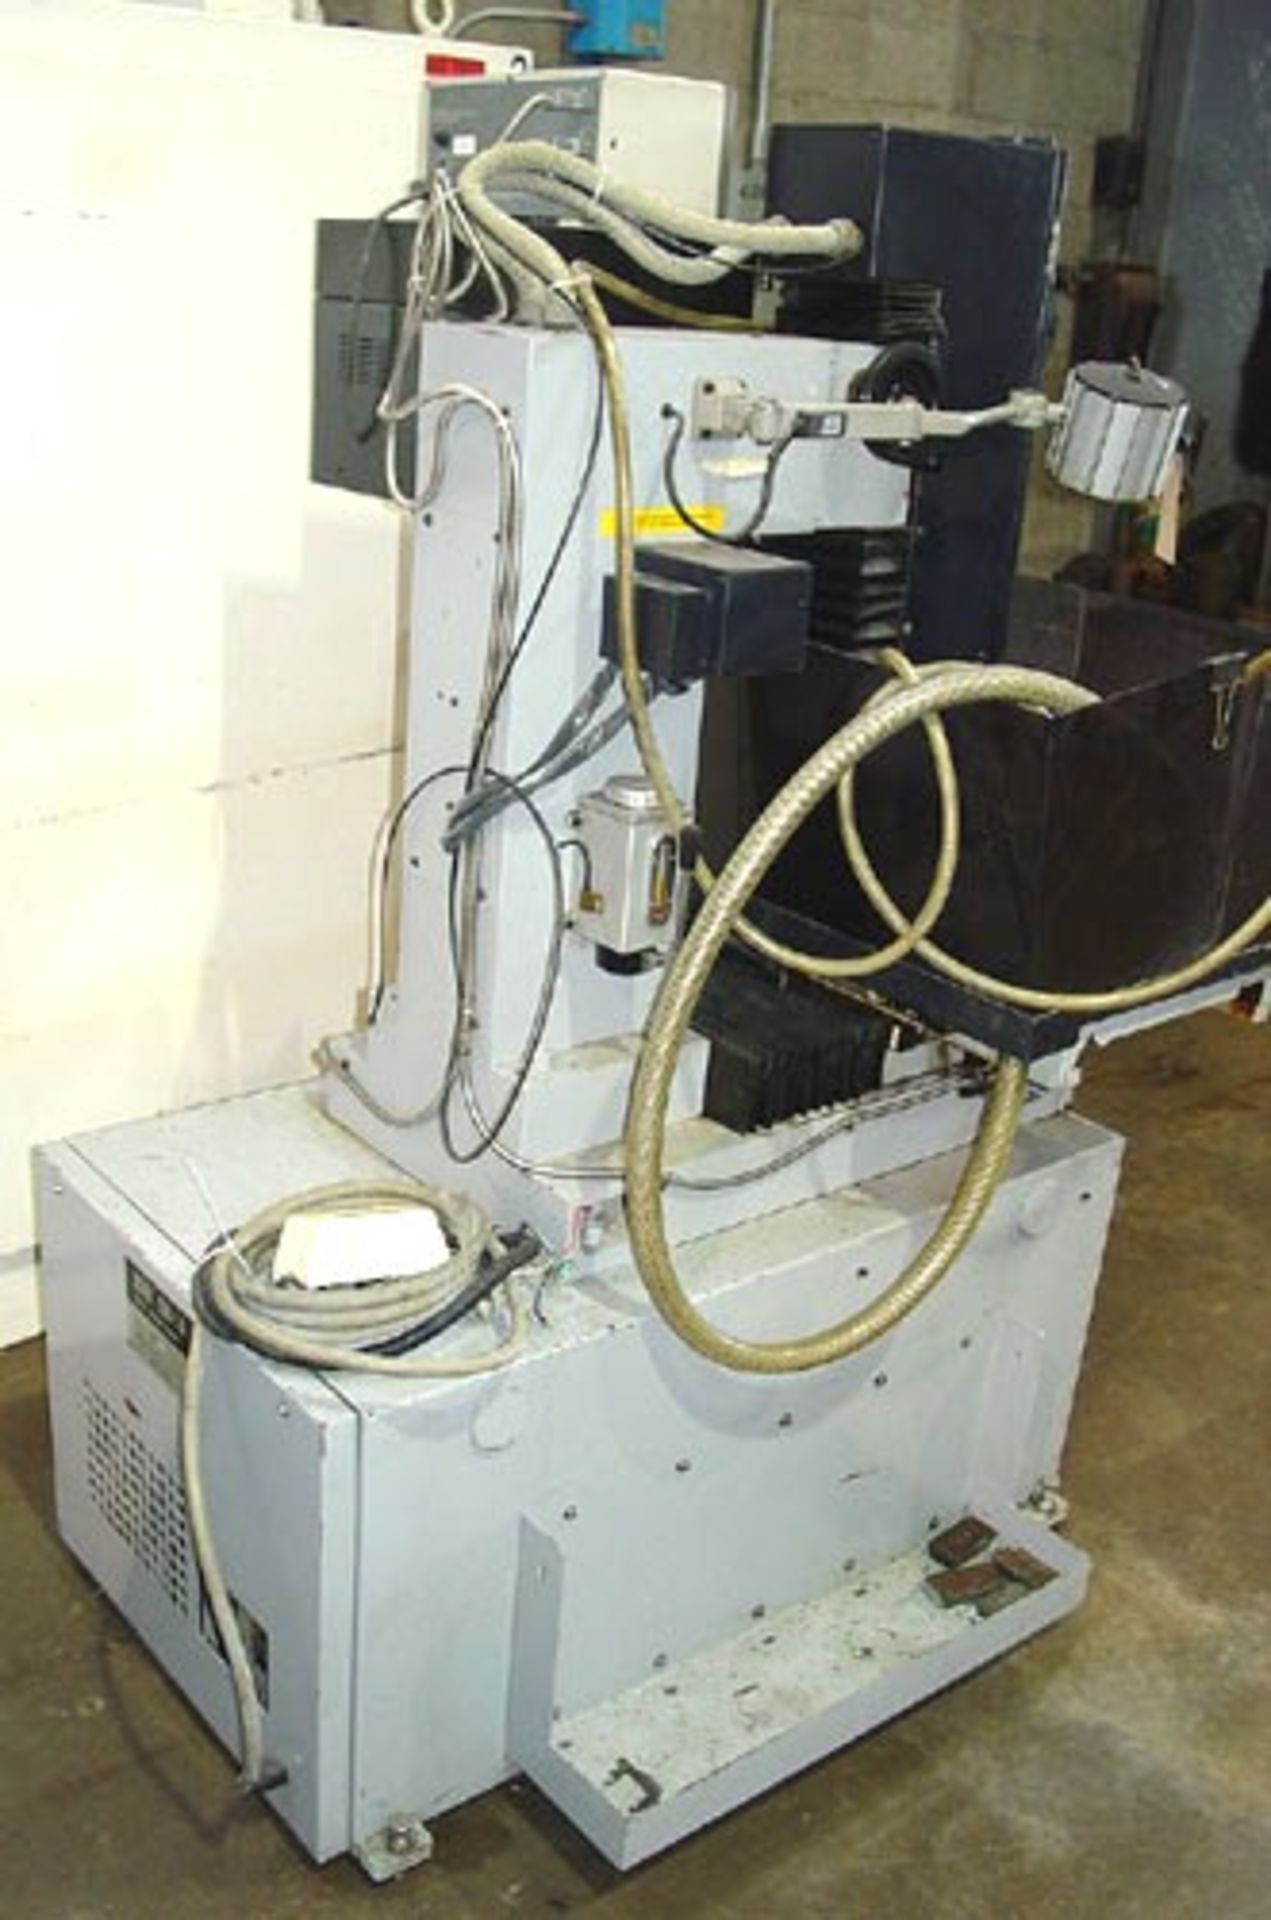 ASTEC EDM HOLE DRILLING MACHINE, Model CDH-3A, S/N 83A003199, New 1995 - Image 5 of 6